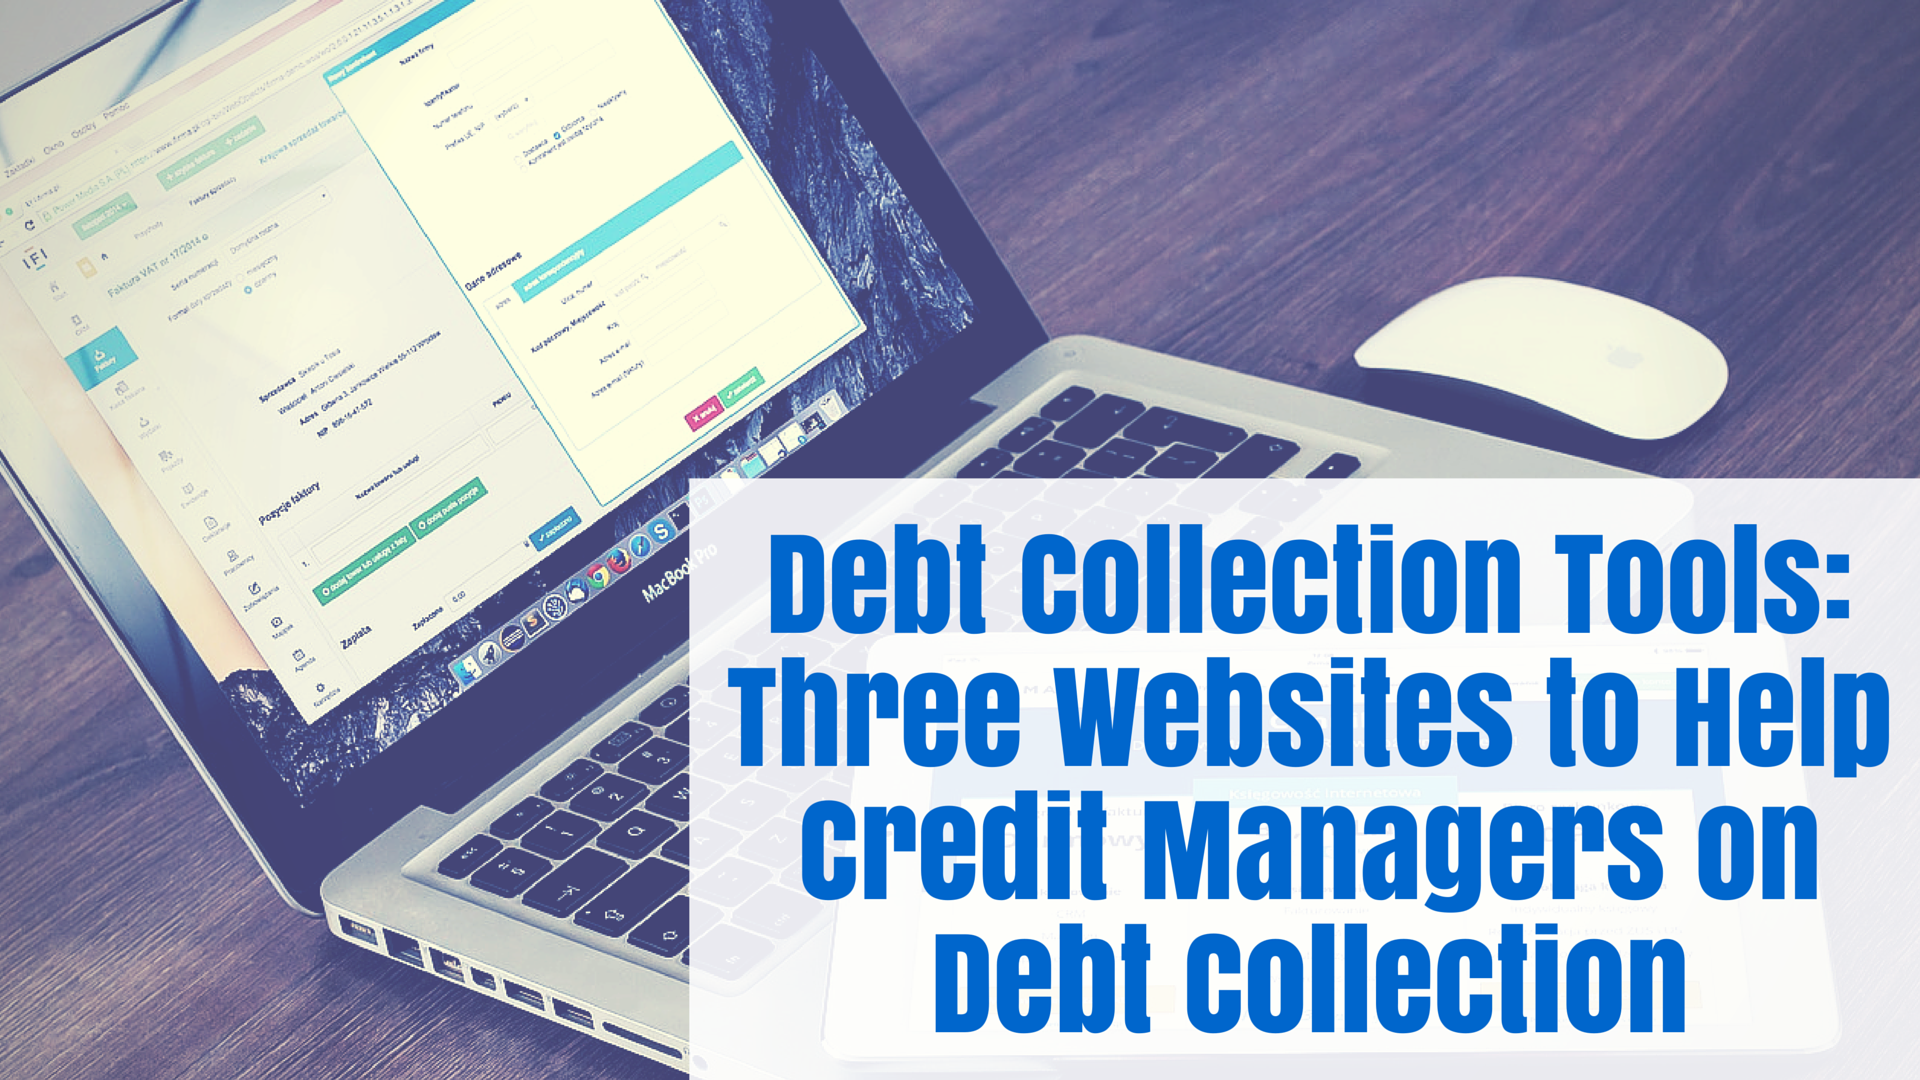 Debt Collection Tools: Three Websites to Help Credit Managers with Debt Collection